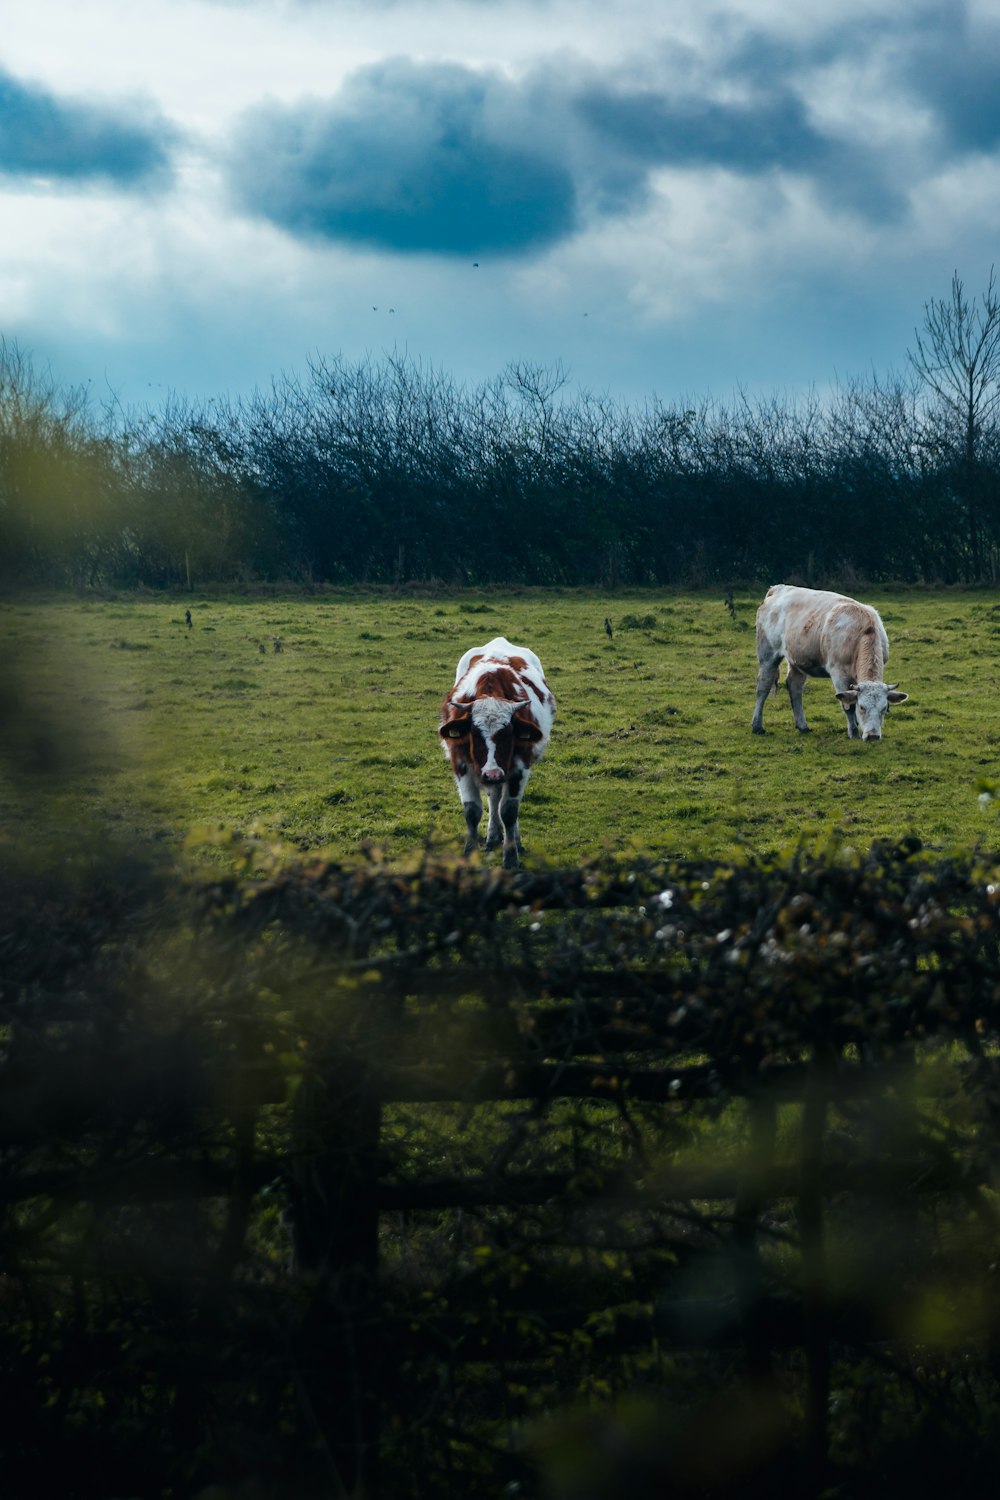 two cows grazing in a grassy field under a cloudy sky